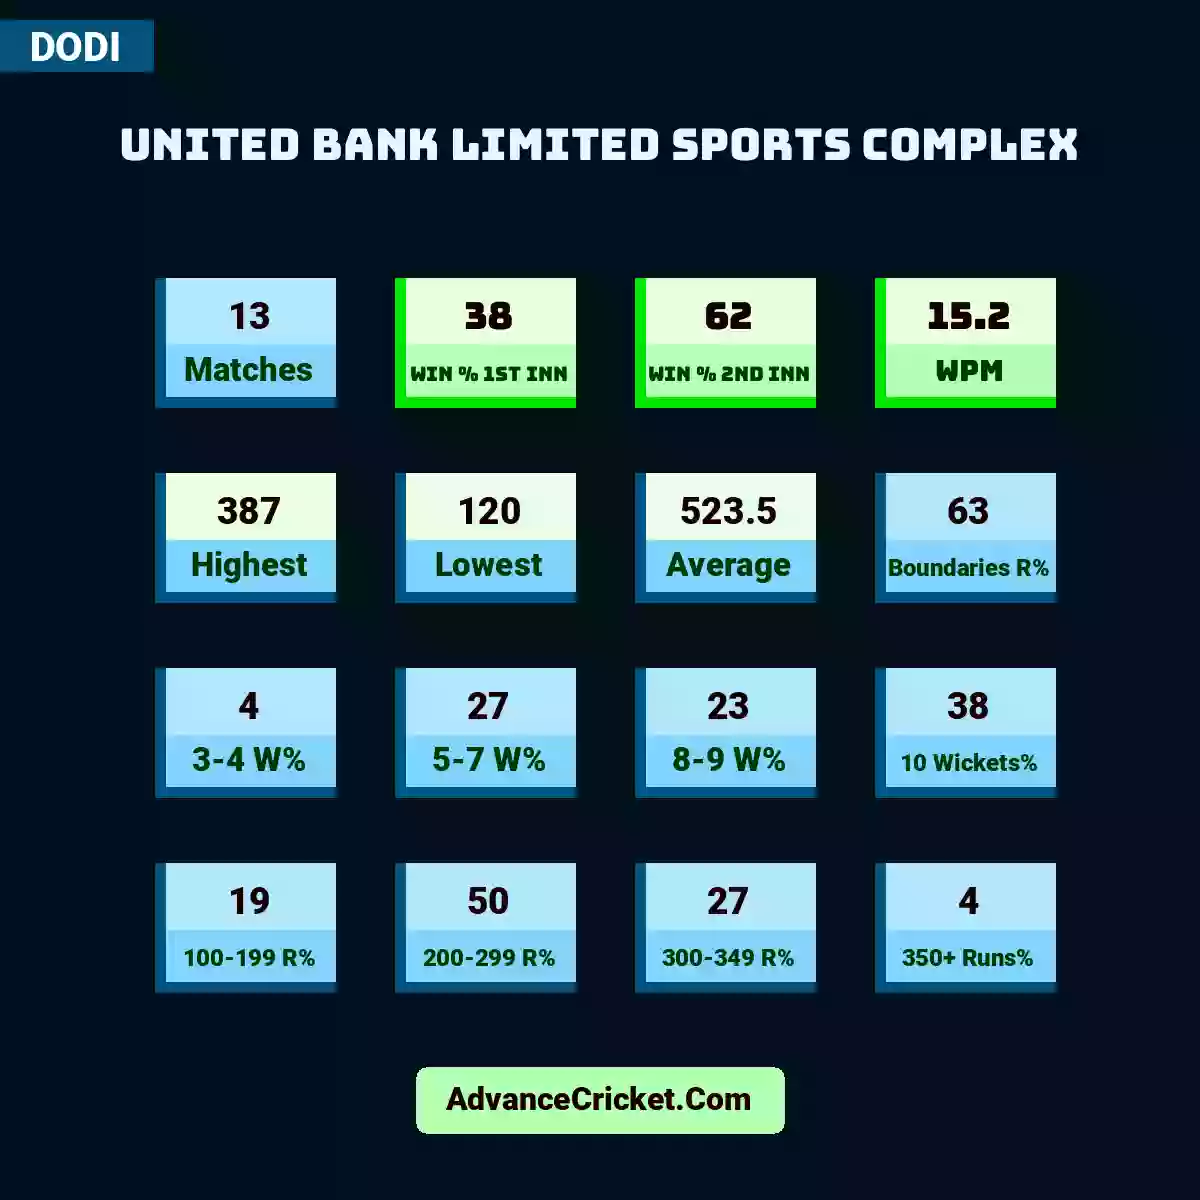 Image showing United Bank Limited Sports Complex with Matches: 13, Win % 1st Inn: 38, Win % 2nd Inn: 62, WPM: 15.2, Highest: 387, Lowest: 120, Average: 523.5, Boundaries R%: 63, 3-4 W%: 4, 5-7 W%: 27, 8-9 W%: 23, 10 Wickets%: 38, 100-199 R%: 19, 200-299 R%: 50, 300-349 R%: 27, 350+ Runs%: 4.